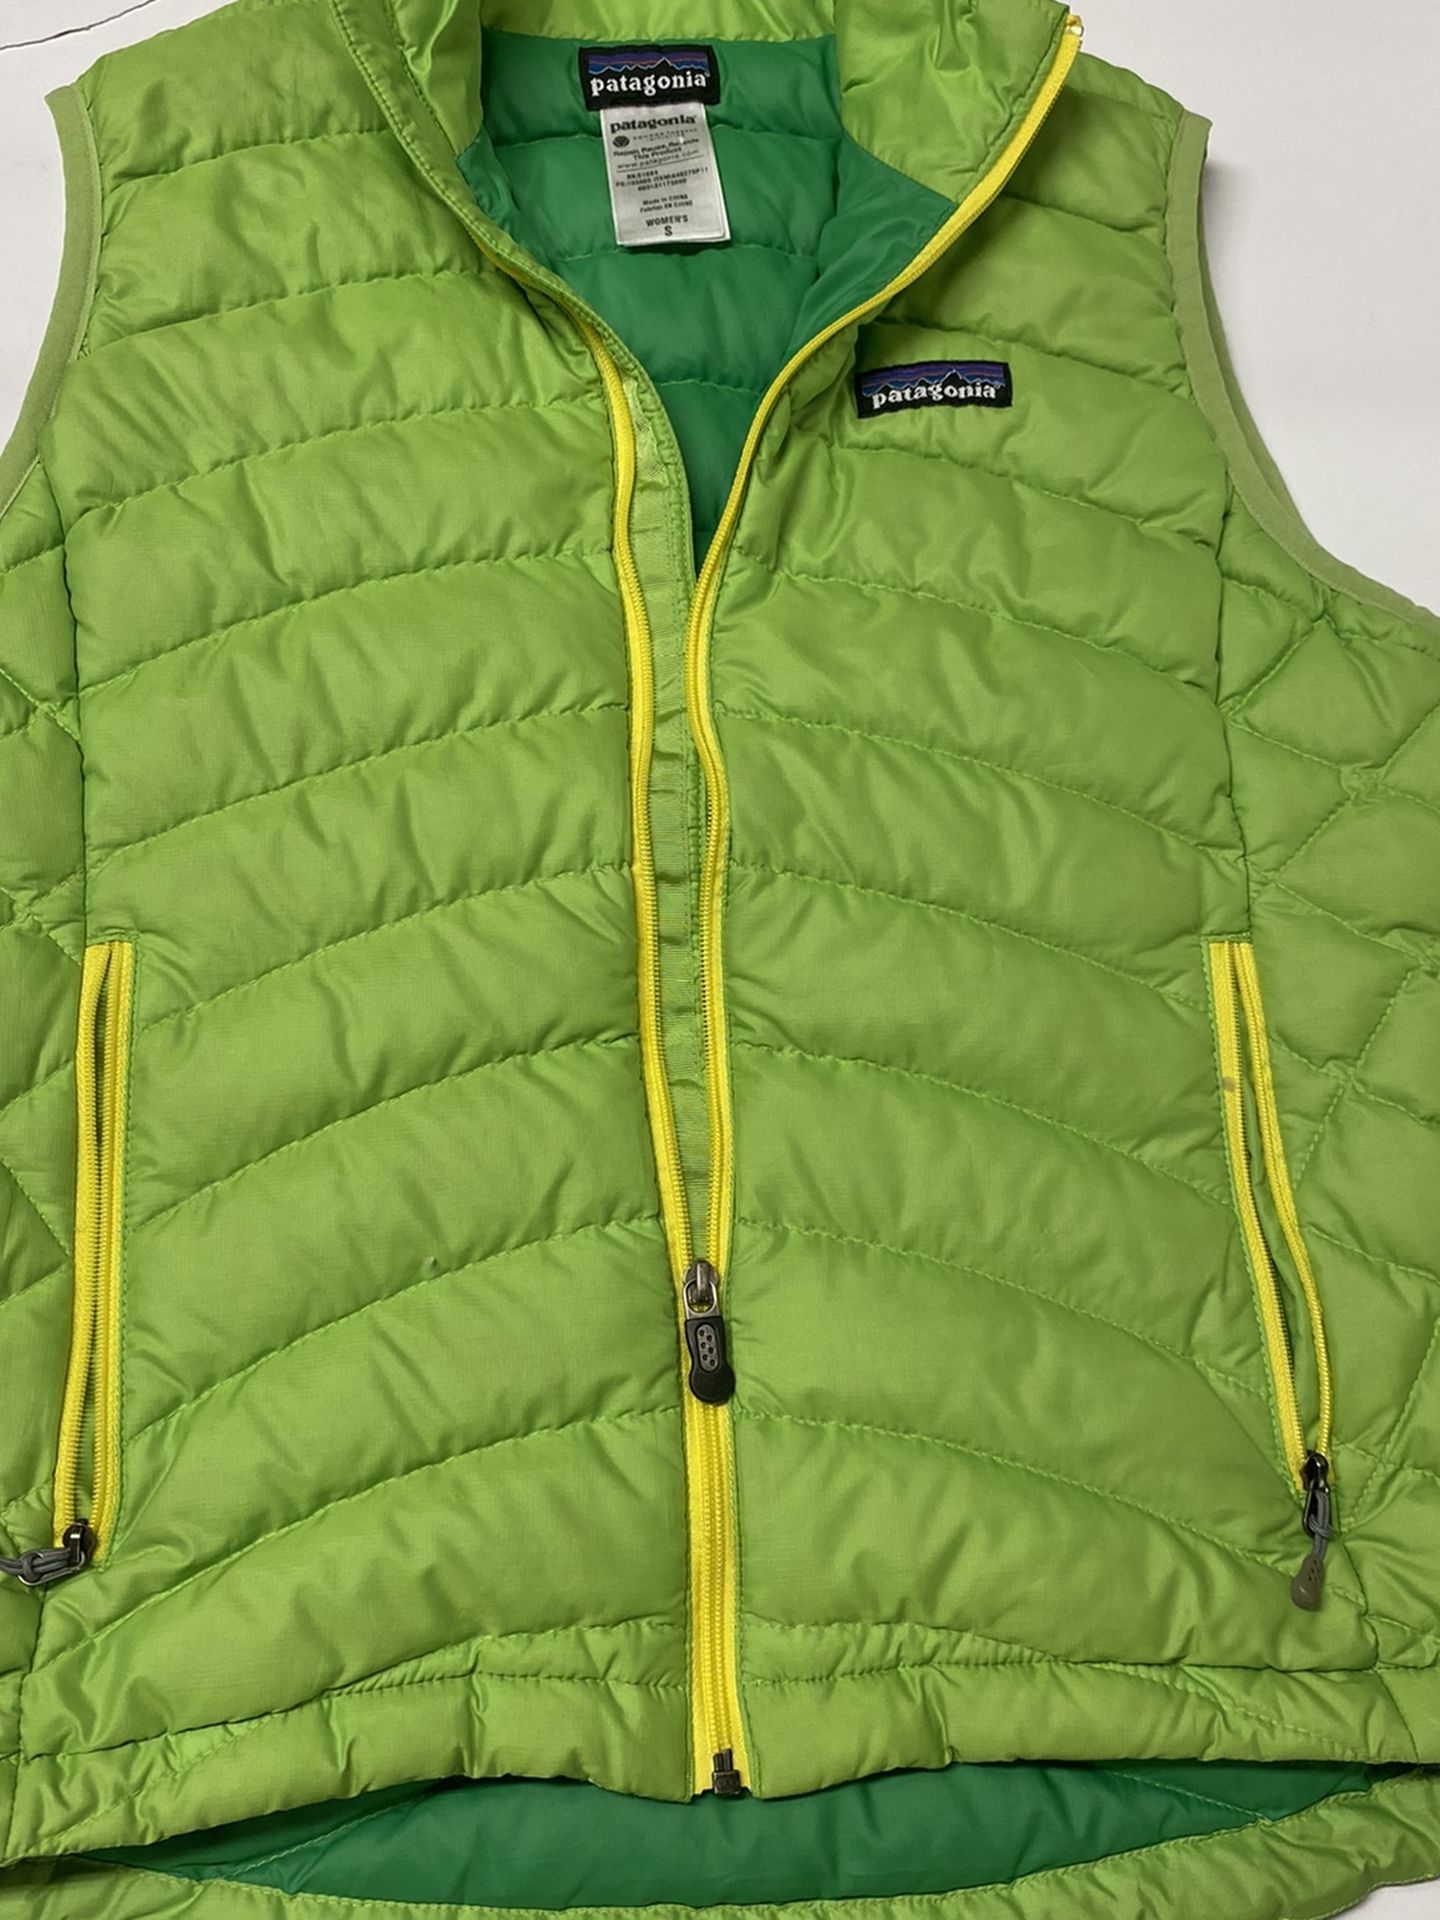 Womens Patagonia Brand Goose Down Puffer Vest Size Small EUC- Green